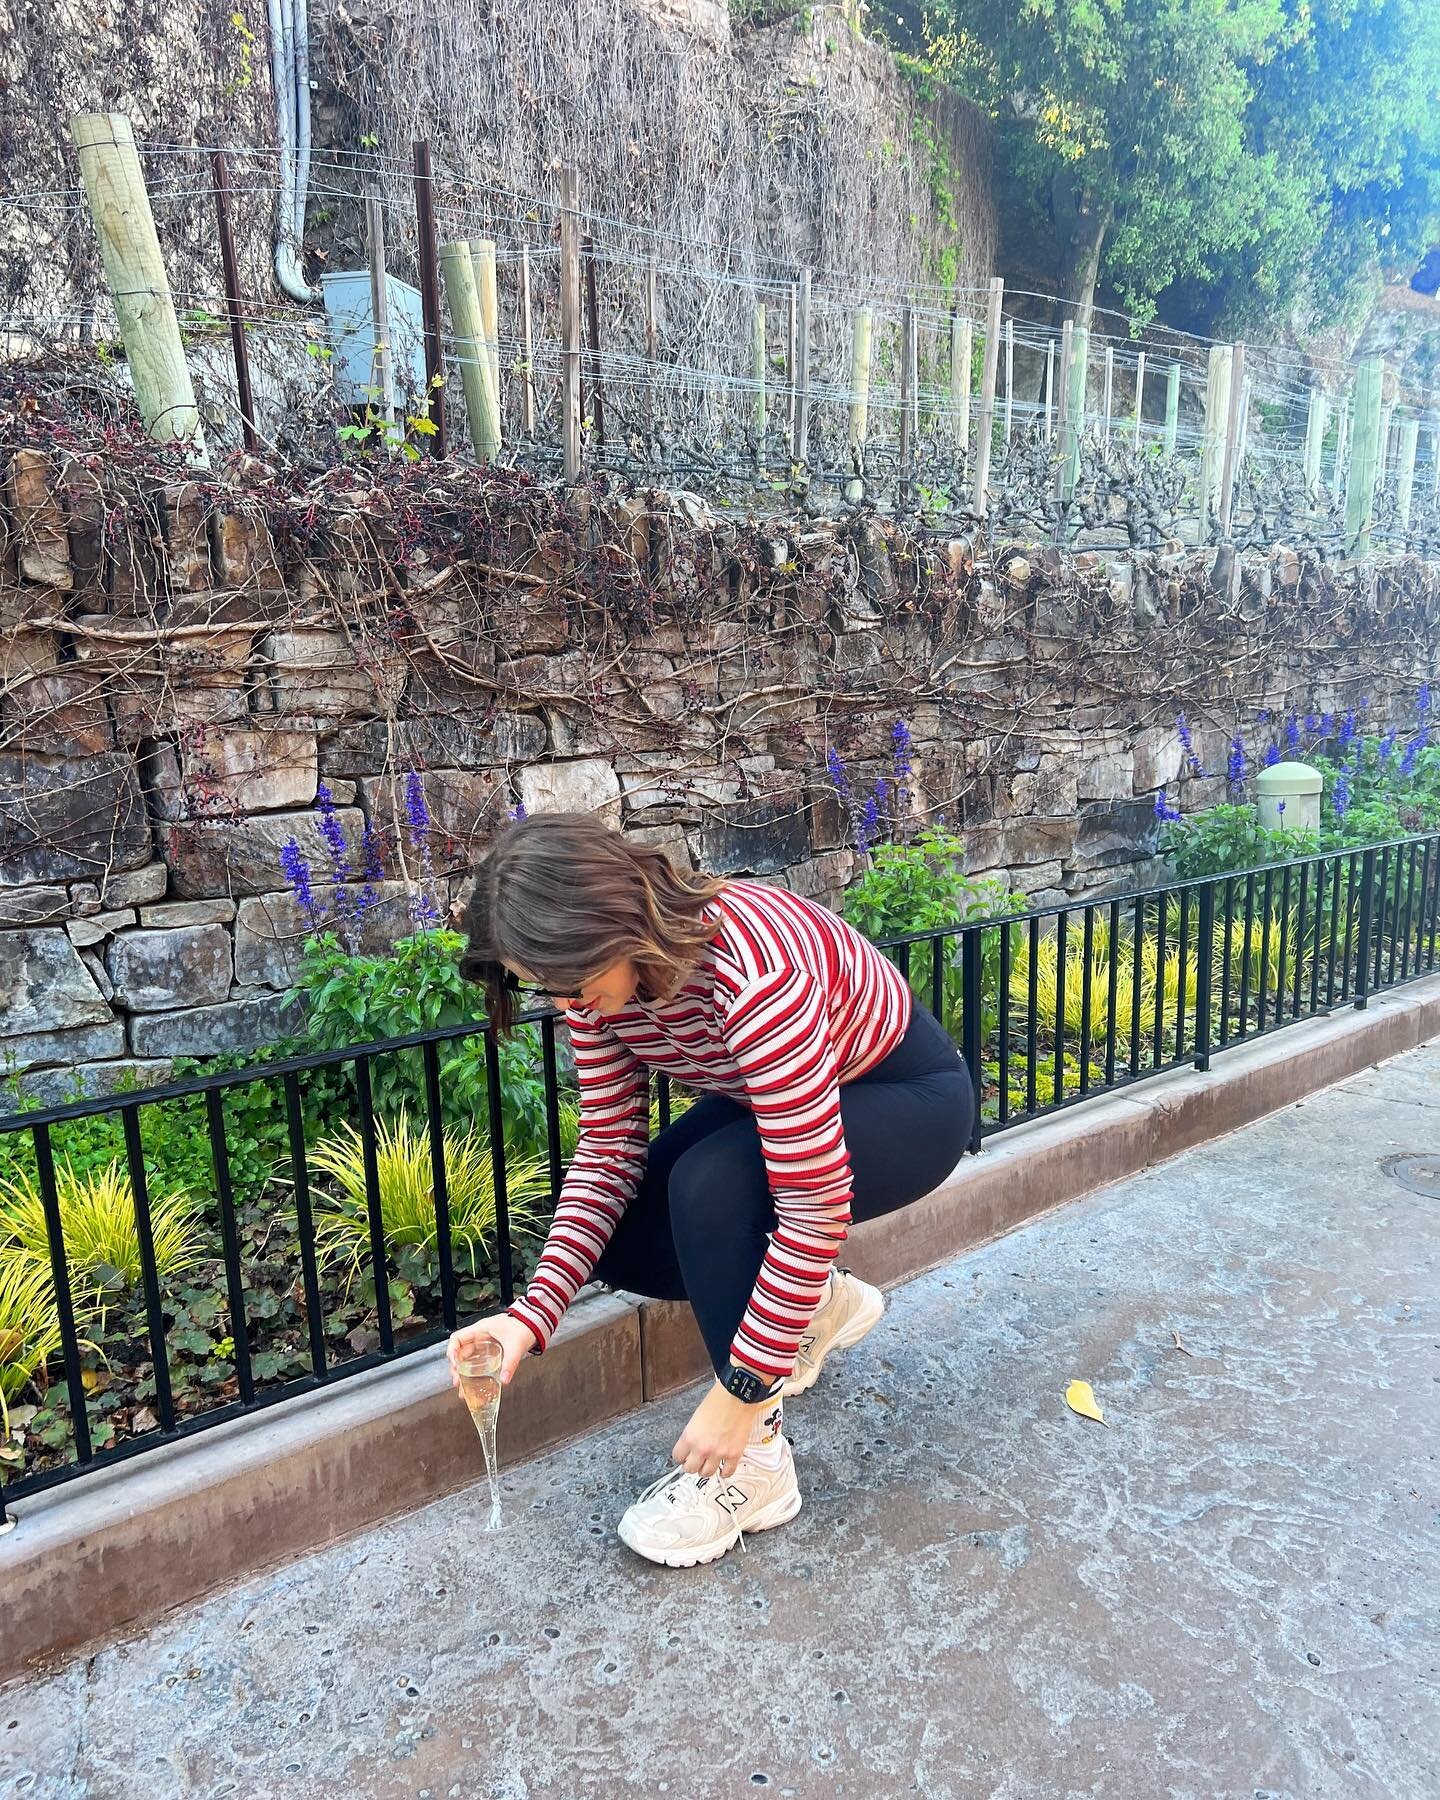 Hot tip: if you drink enough prosecco at Disney your feet won&rsquo;t hurt